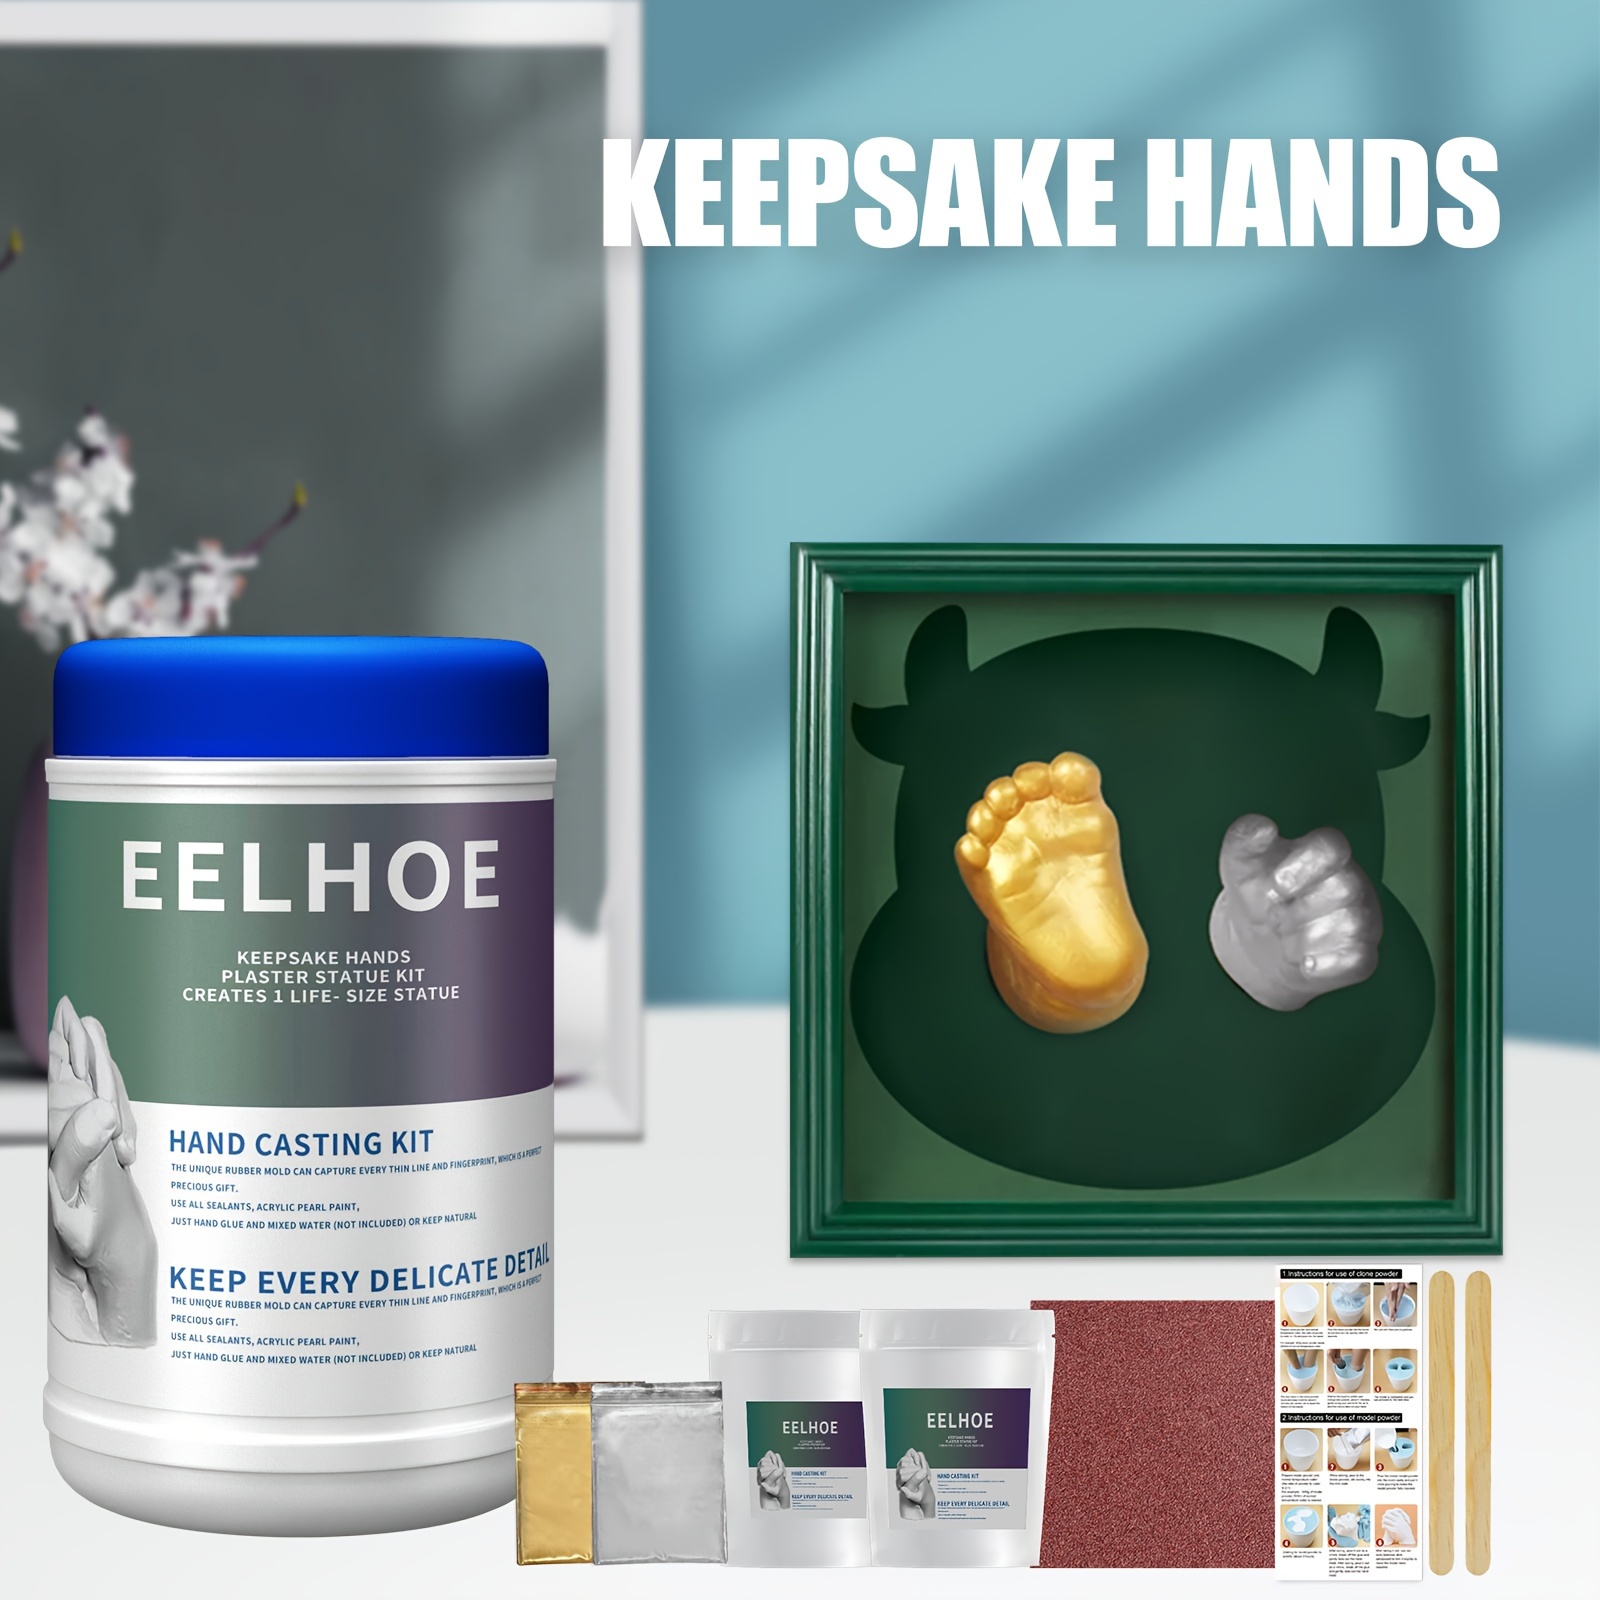 Falling in Art Hand Casting Kit Couples - Keepsake Plaster Hand Mold Kit  for Family, Kids, Adults with Large Bucket, Gloves, Powder Materials, Color